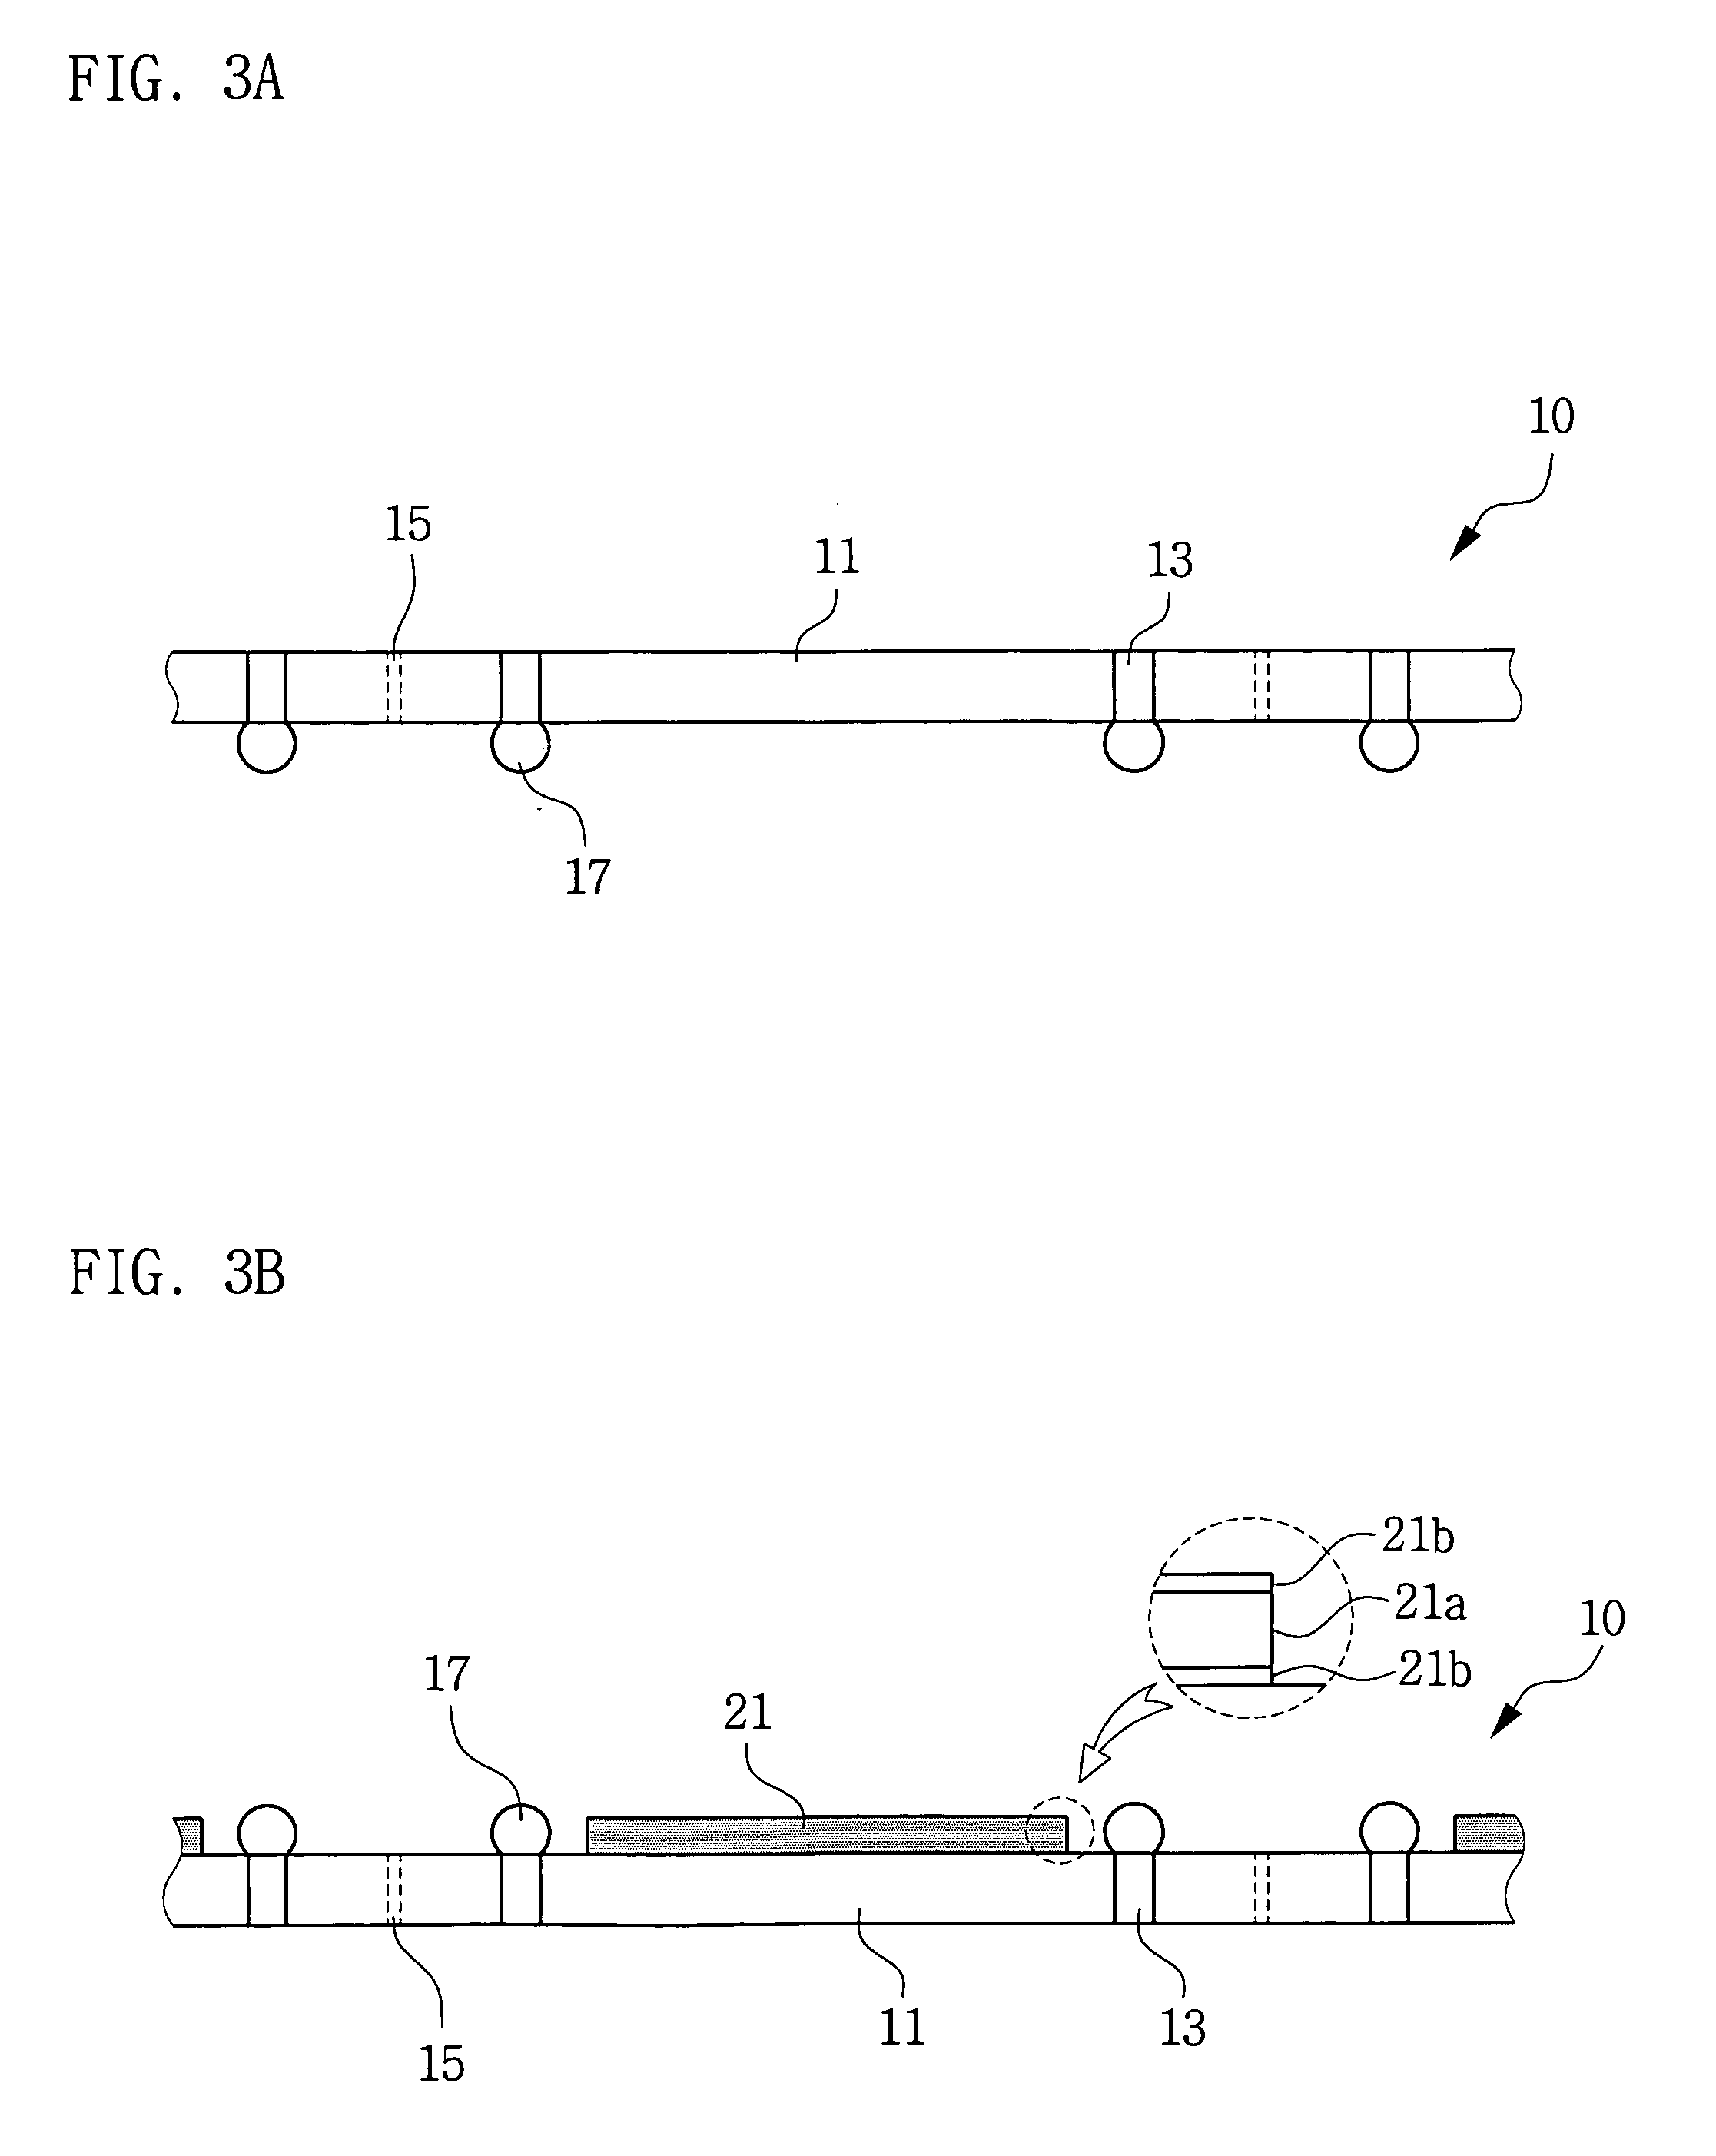 Method for manufacturing wafer level chip stack package